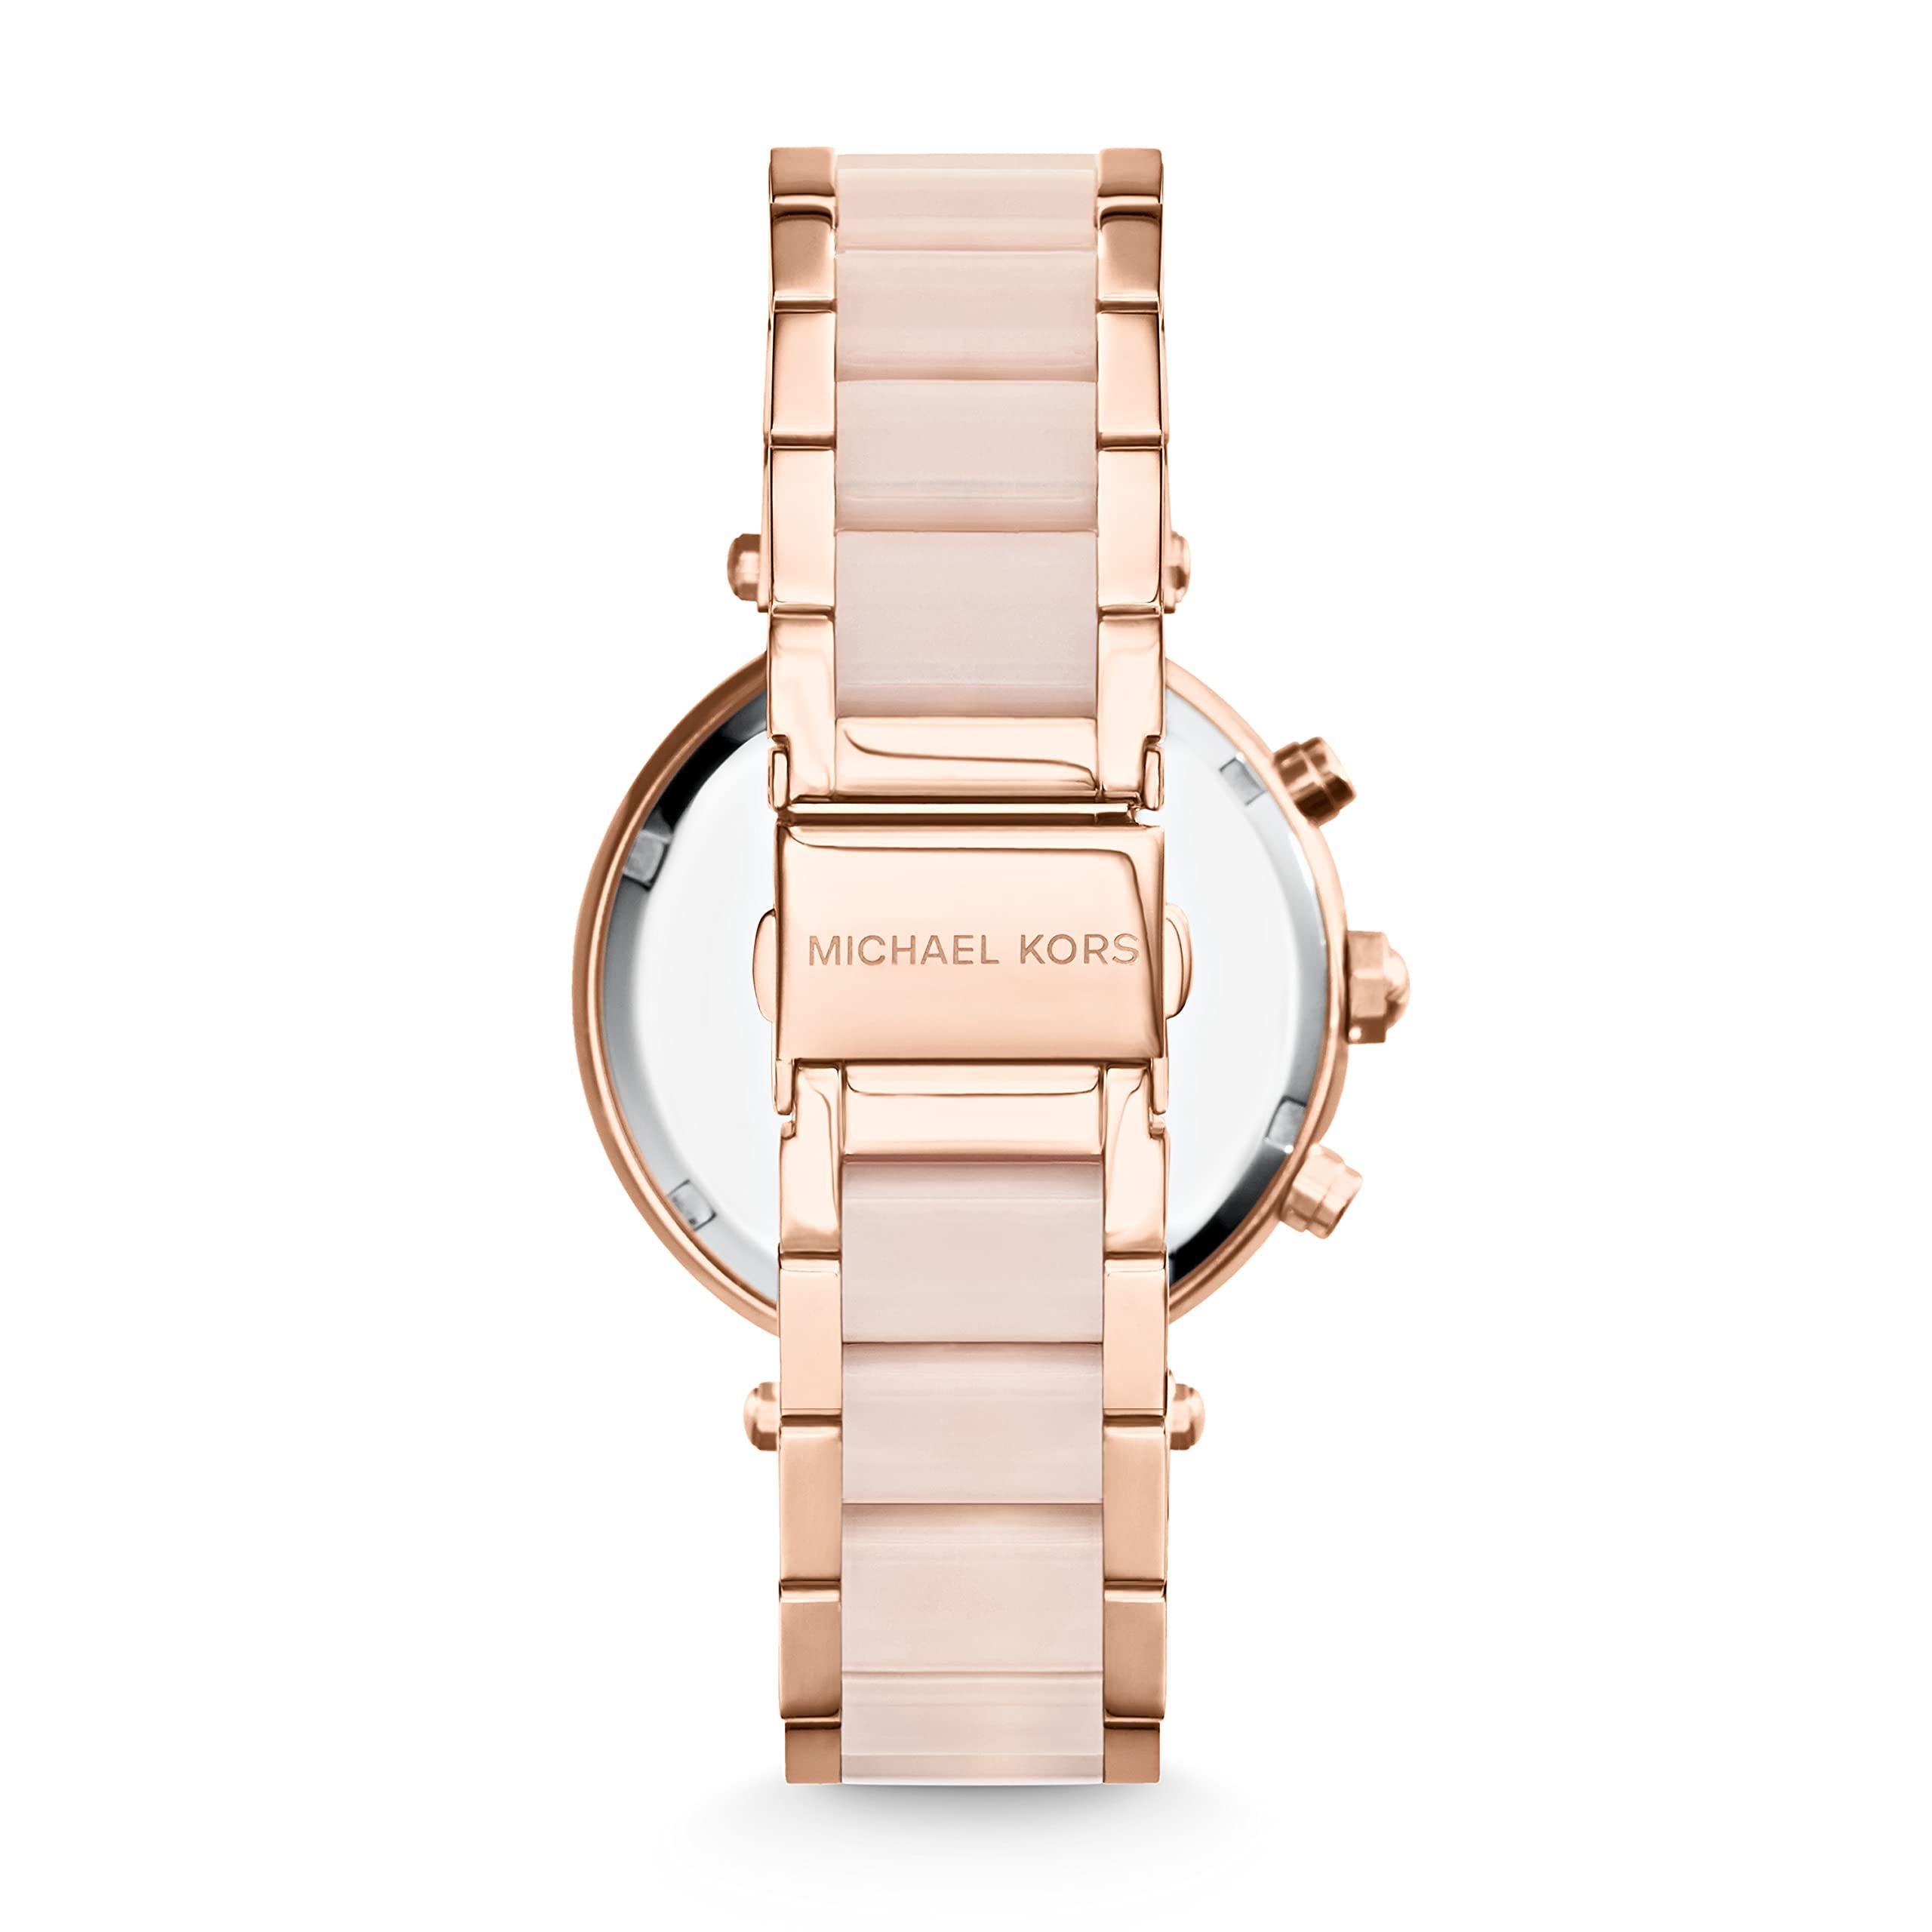 Patent Prøve Undertrykkelse Michael Kors Chronograph Quartz Watch With Stainless Steel Acetate Strap  Mk5896 in Brown (Pink) - Save 66% - Lyst